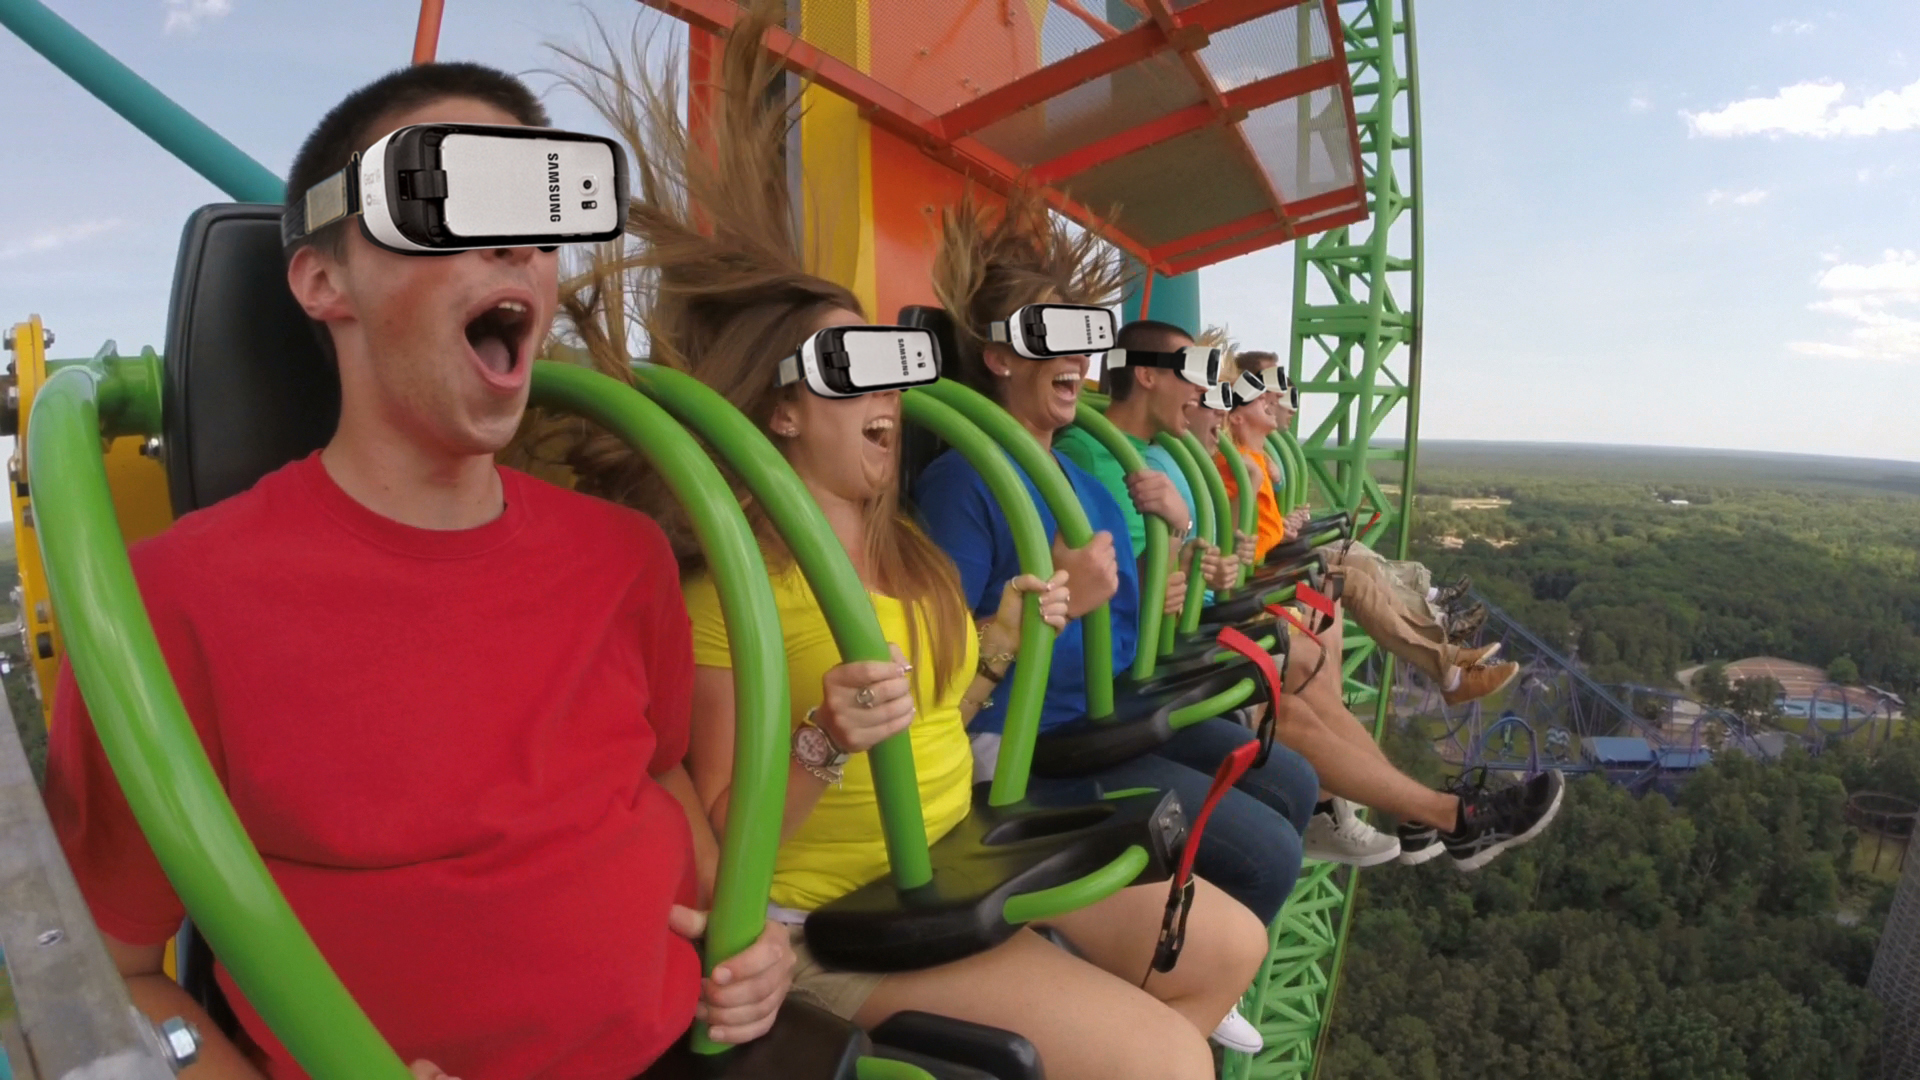 World’s Tallest and Fastest Drop Ride to Debut Extreme VR Experience at Six...